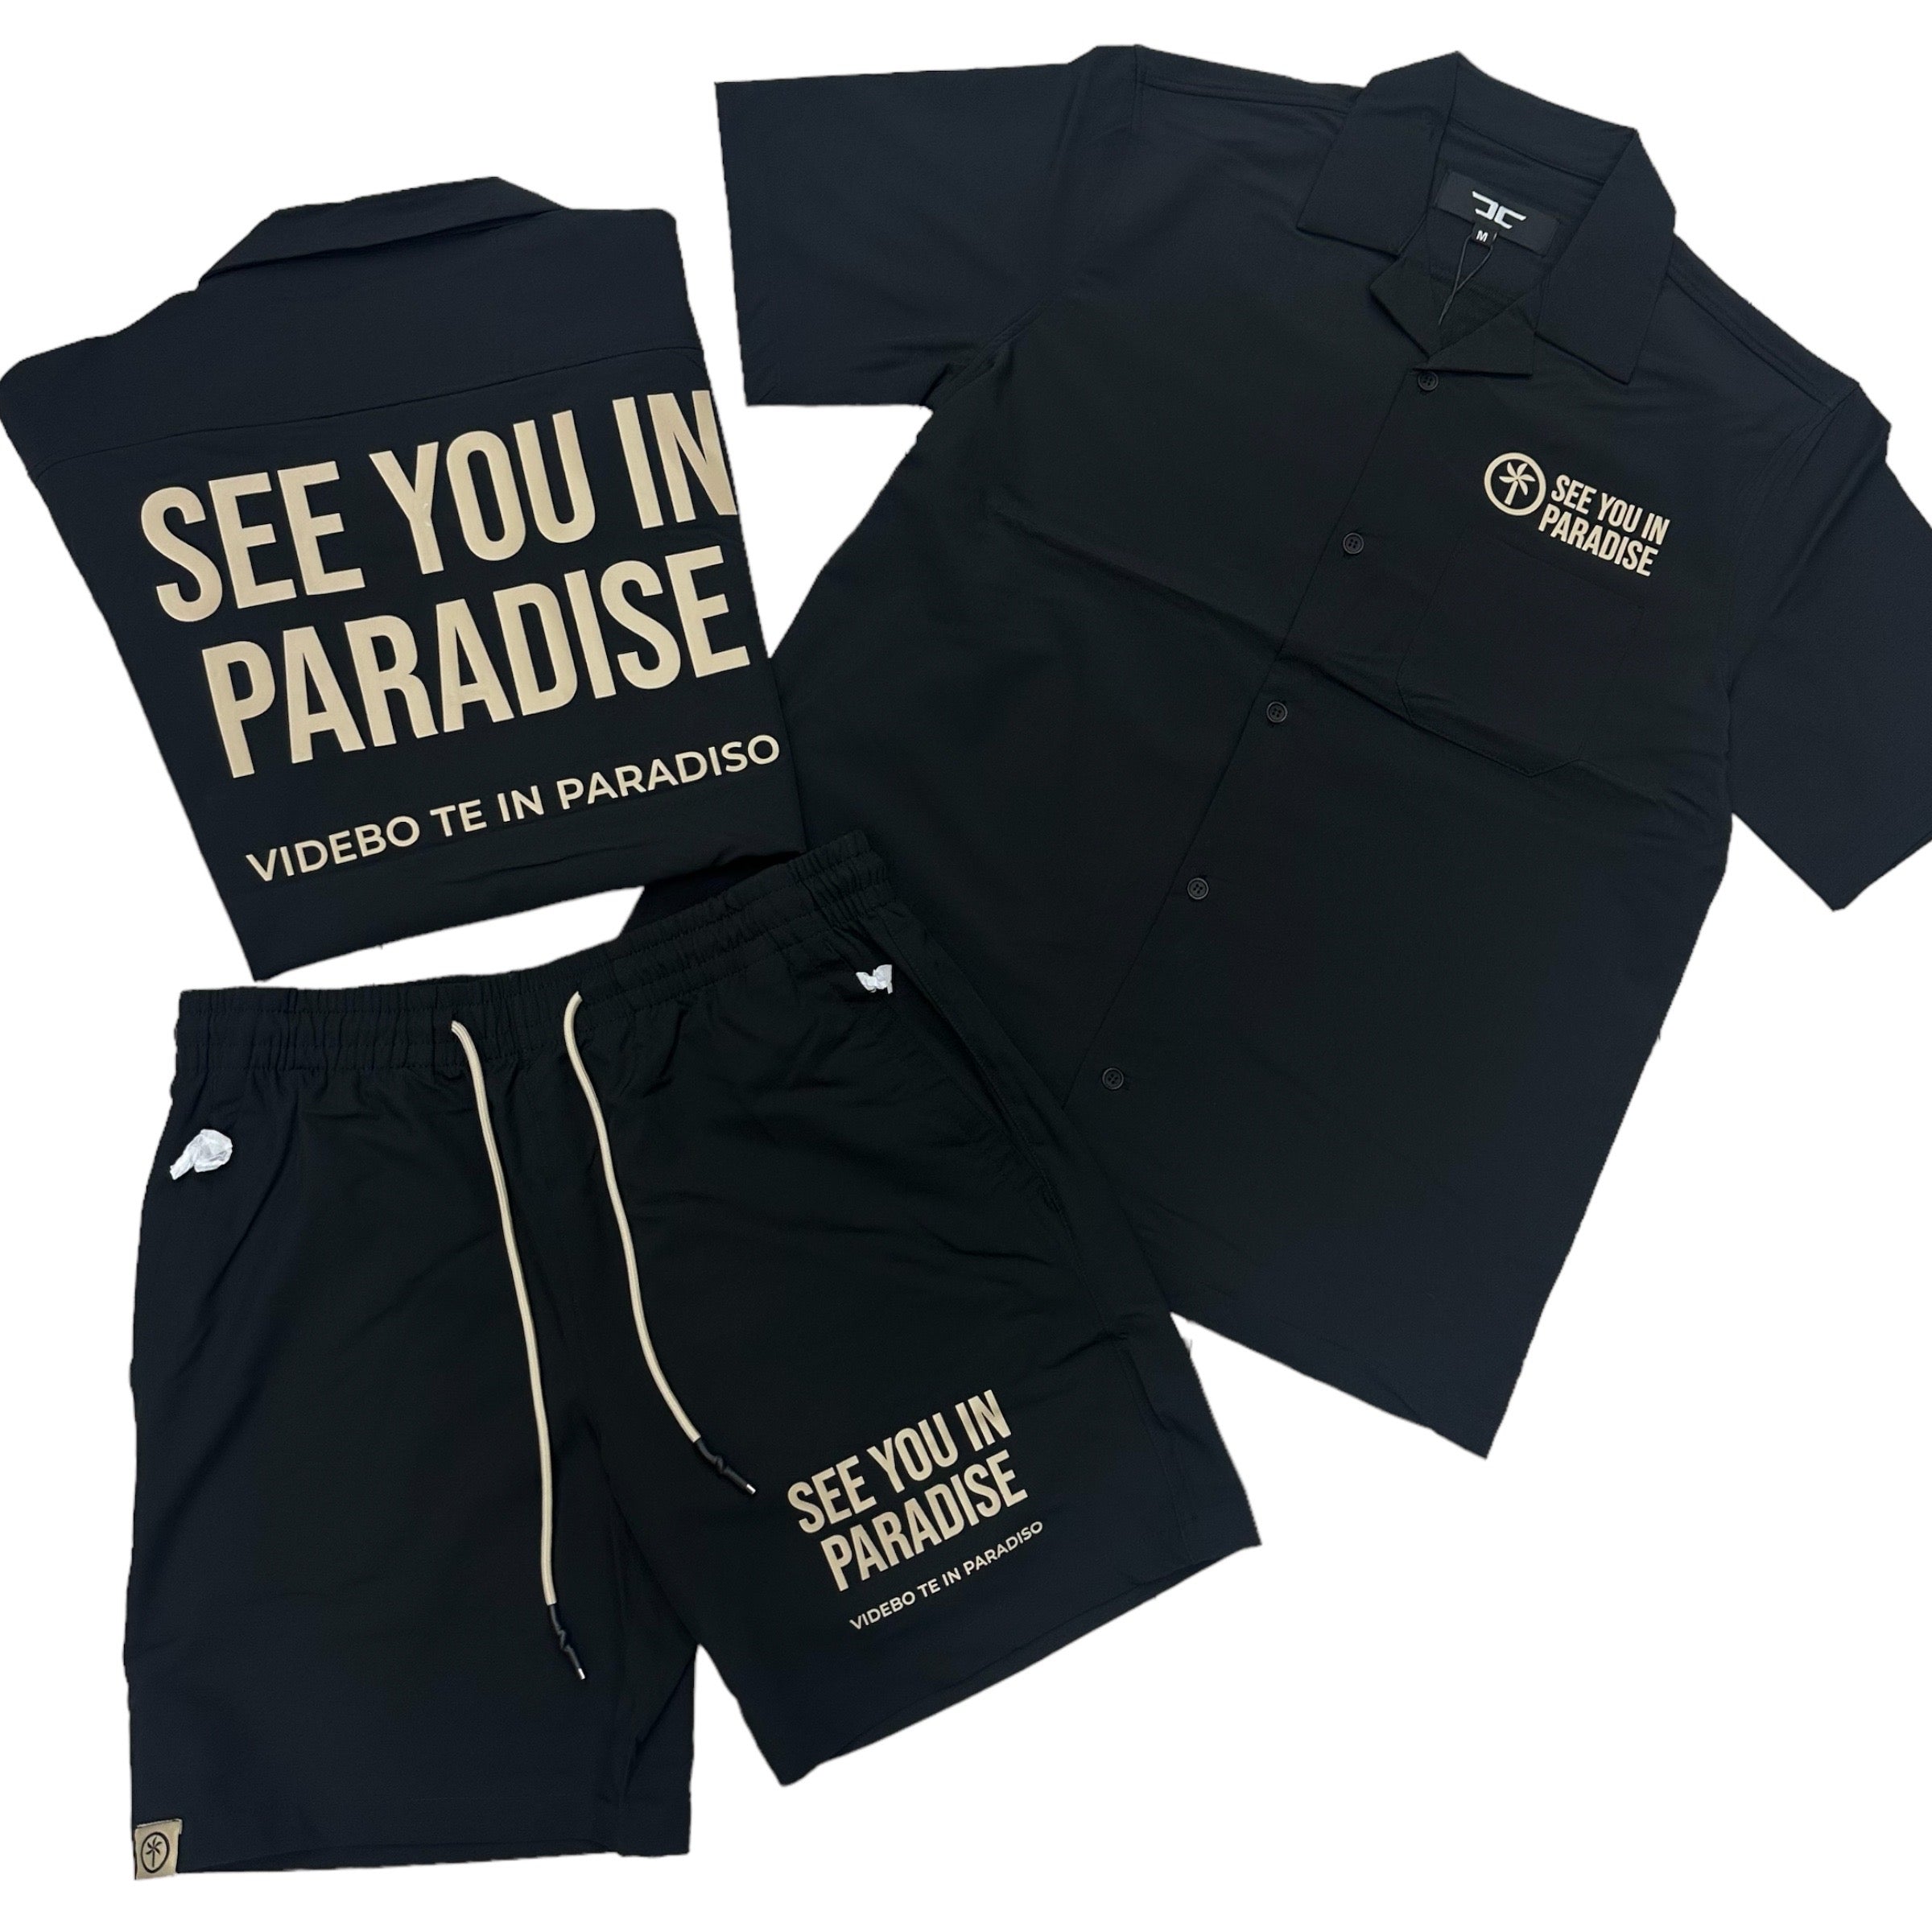 JC See You In Paradise TONE Shirt Set Black Sand 2554